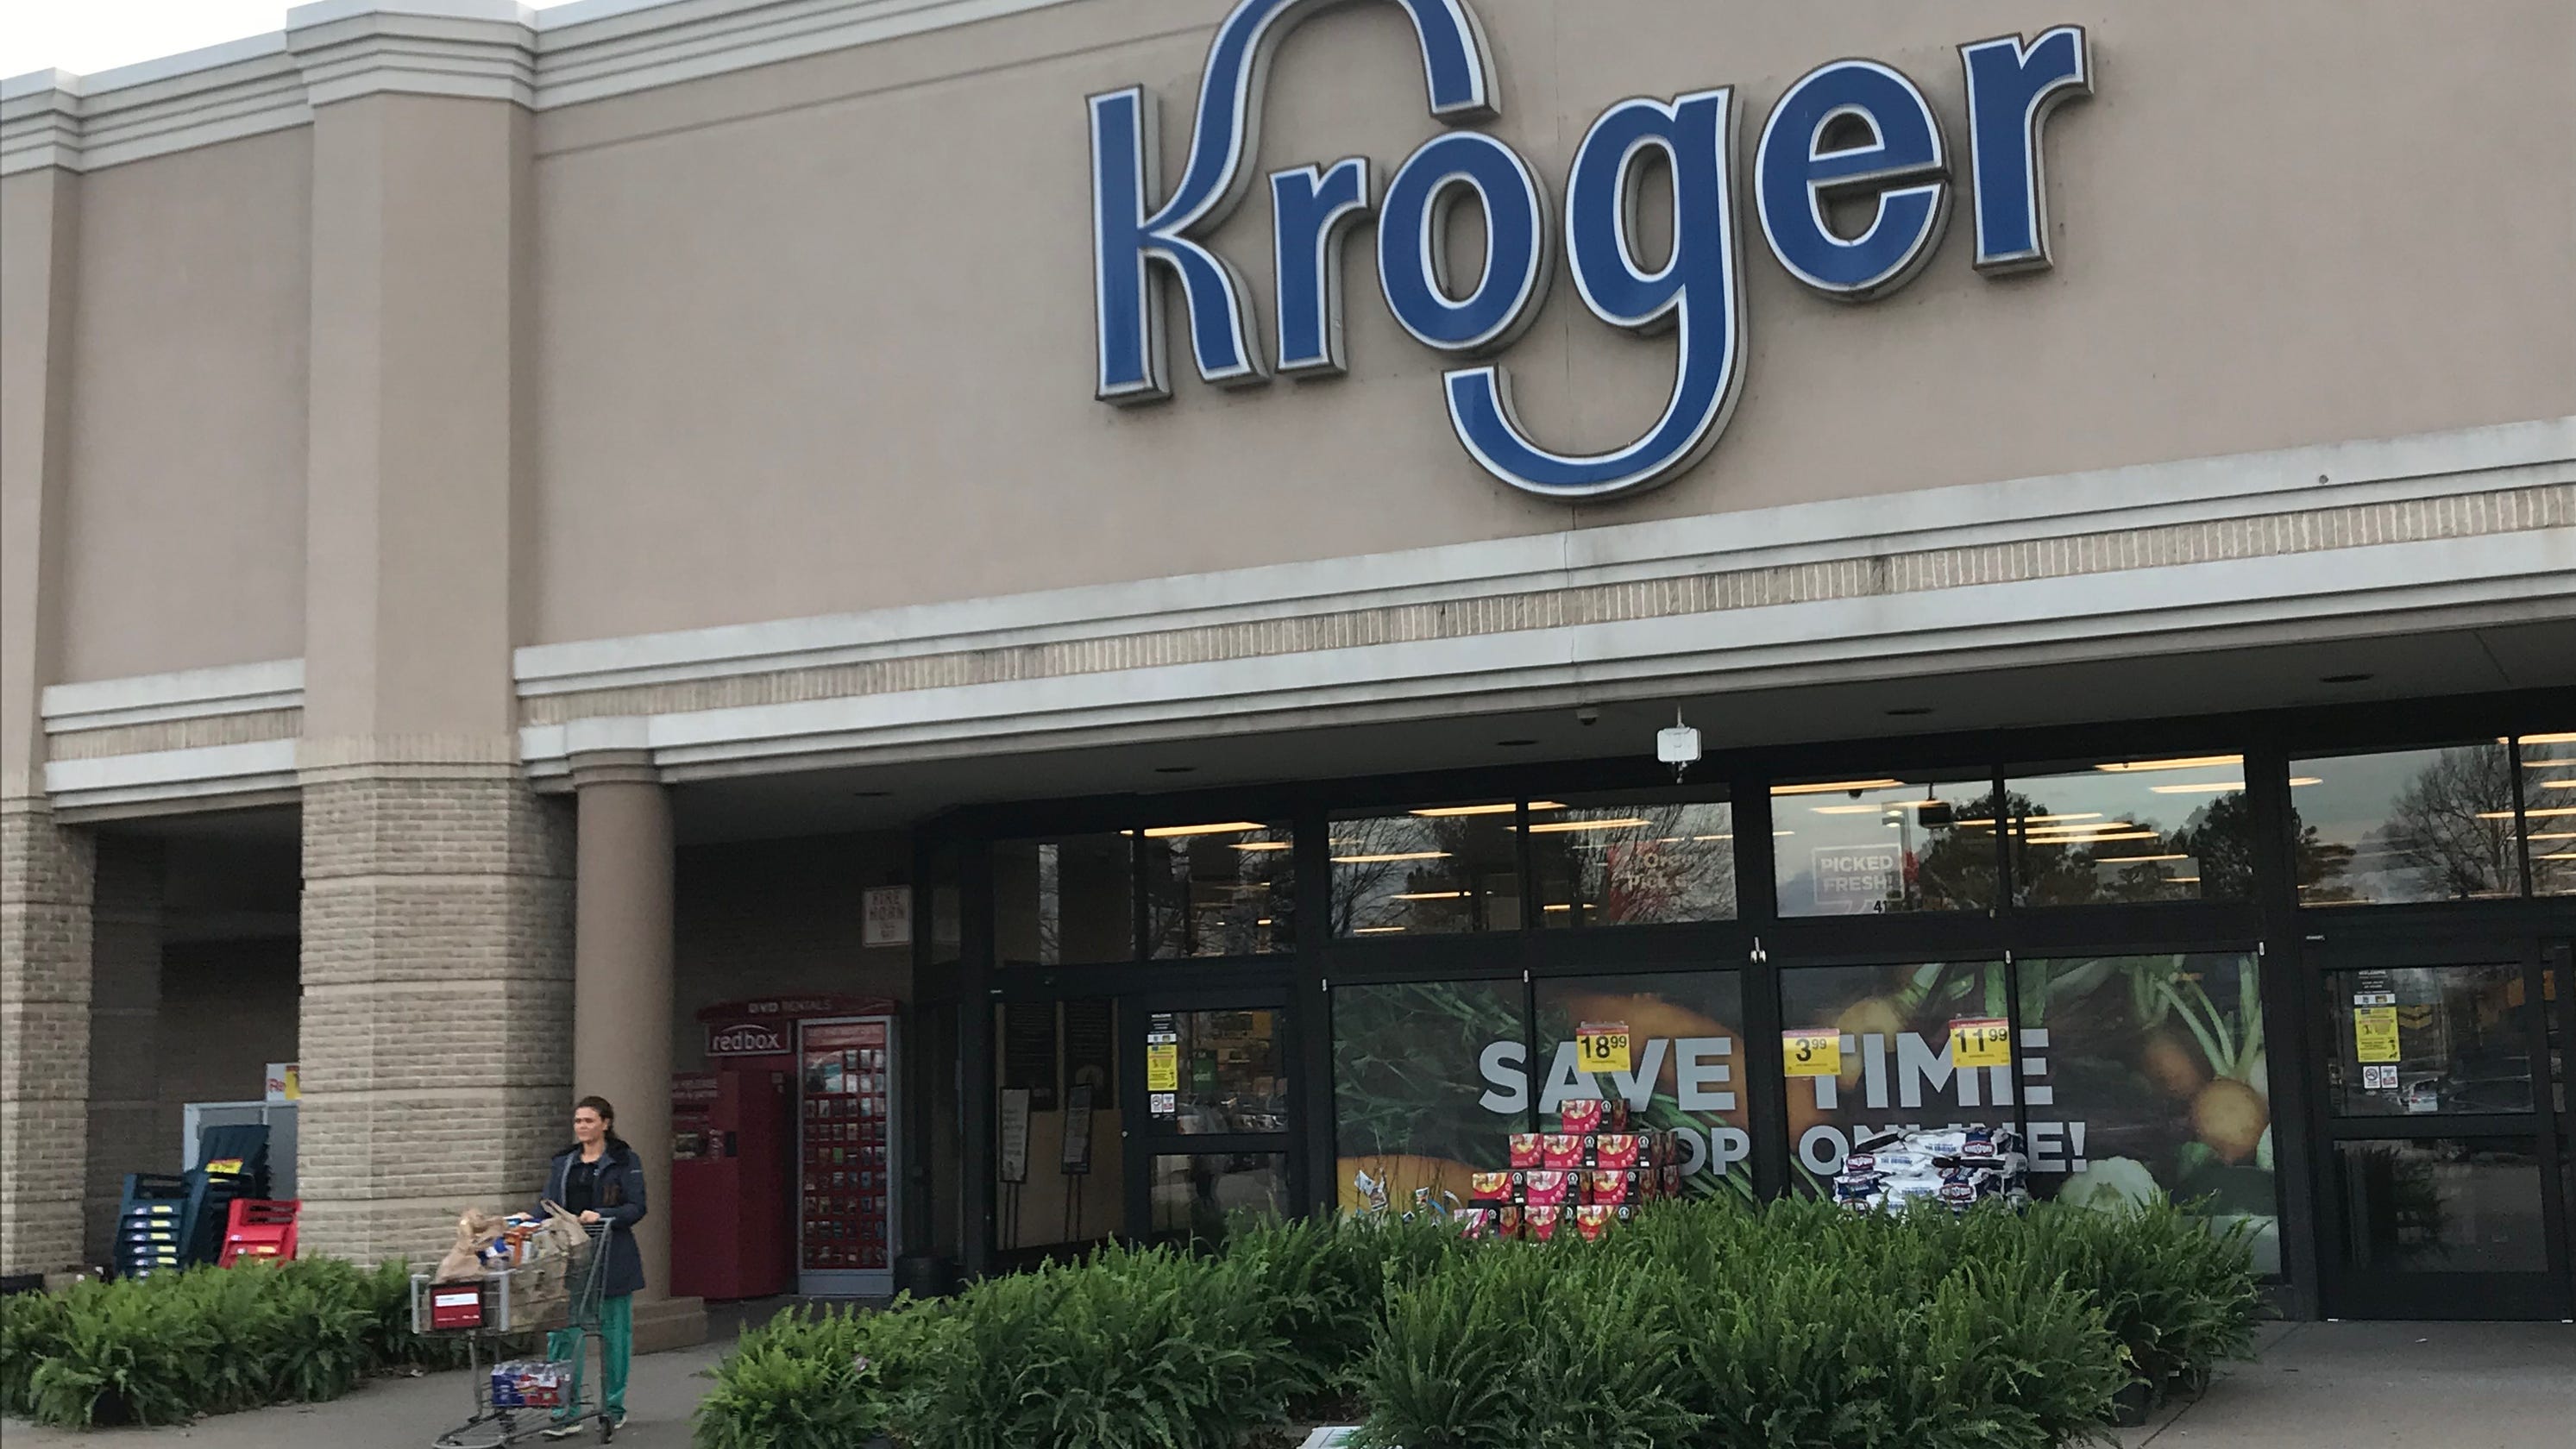 Customers Perform Cpr On Another Man At Different Jackson Kroger